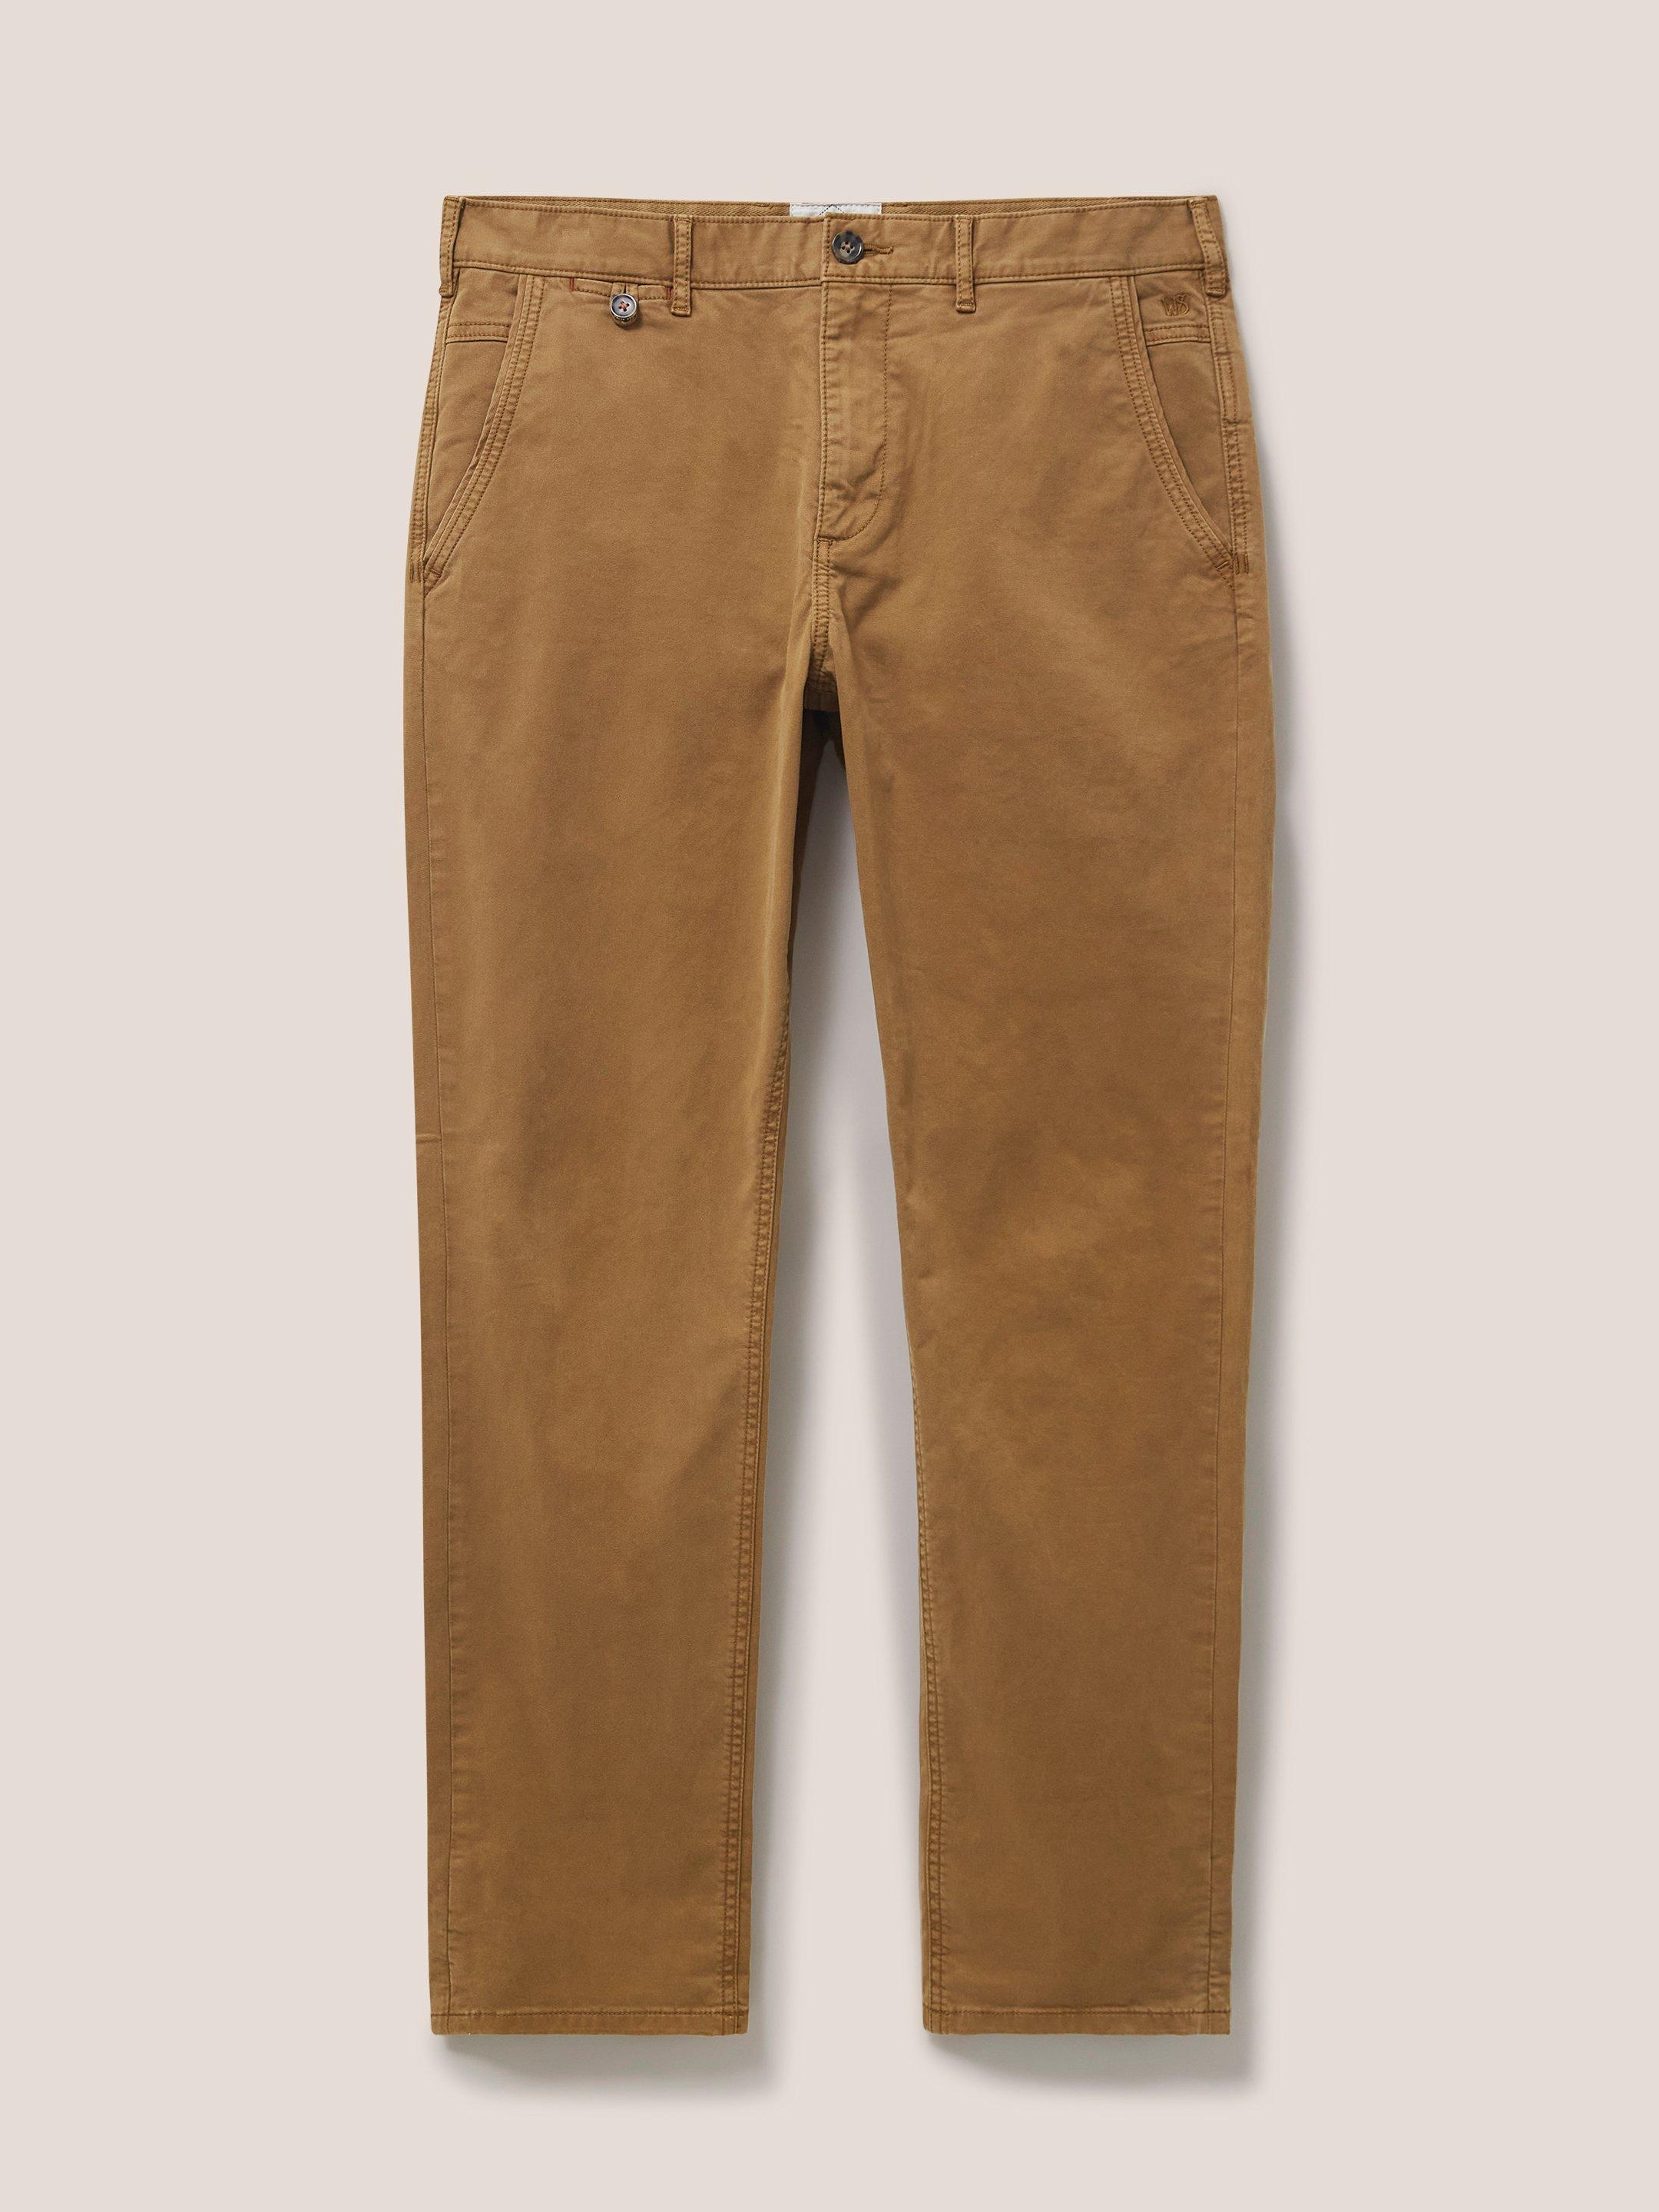 Sutton Organic Chino Trouser in MID BROWN - FLAT FRONT